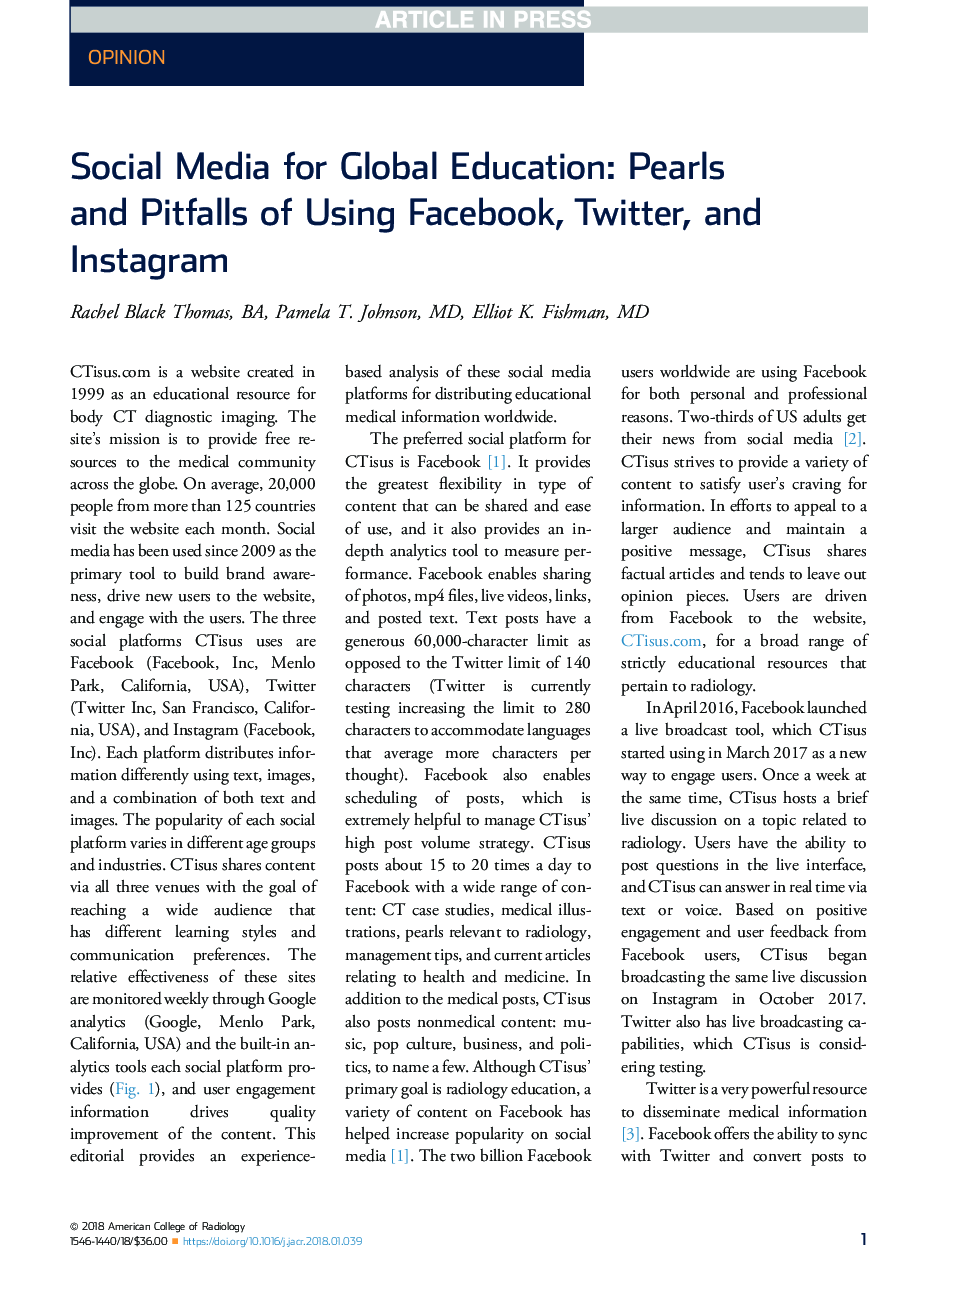 Social Media for Global Education: Pearls and Pitfalls of Using Facebook, Twitter, and Instagram